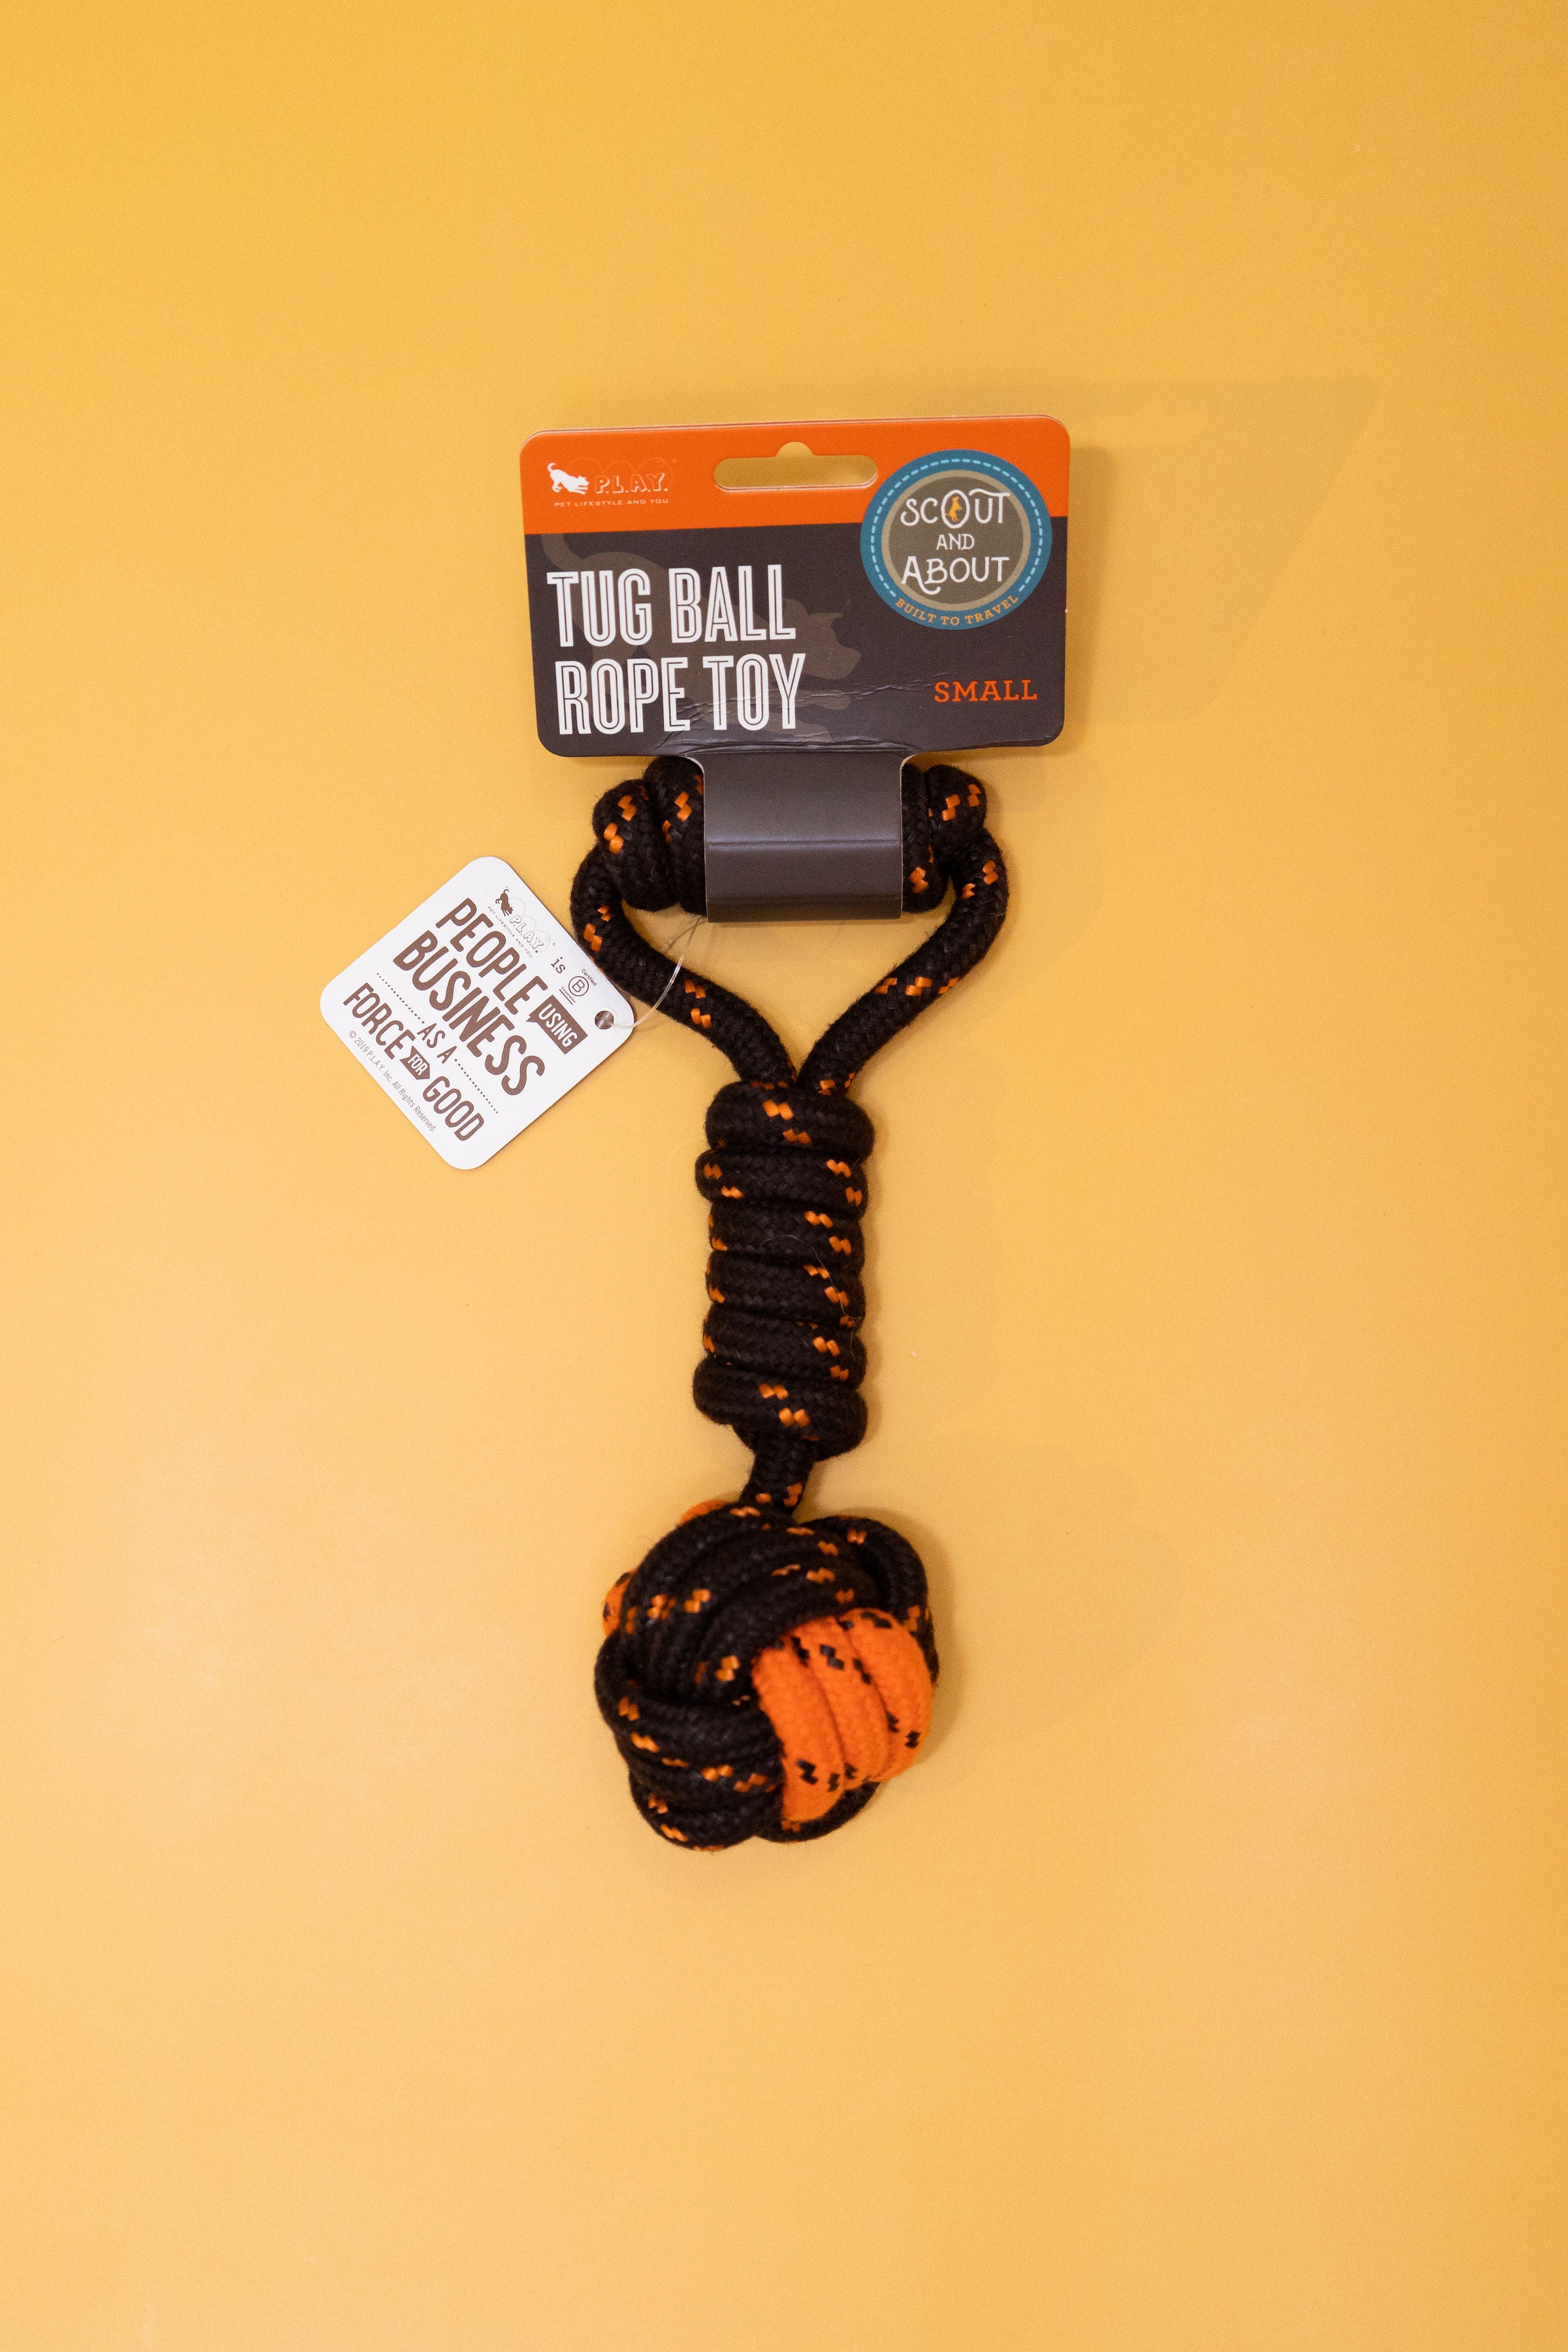 P.L.A.Y. Scout & About Rope Tug Ball Dog Toy, Large